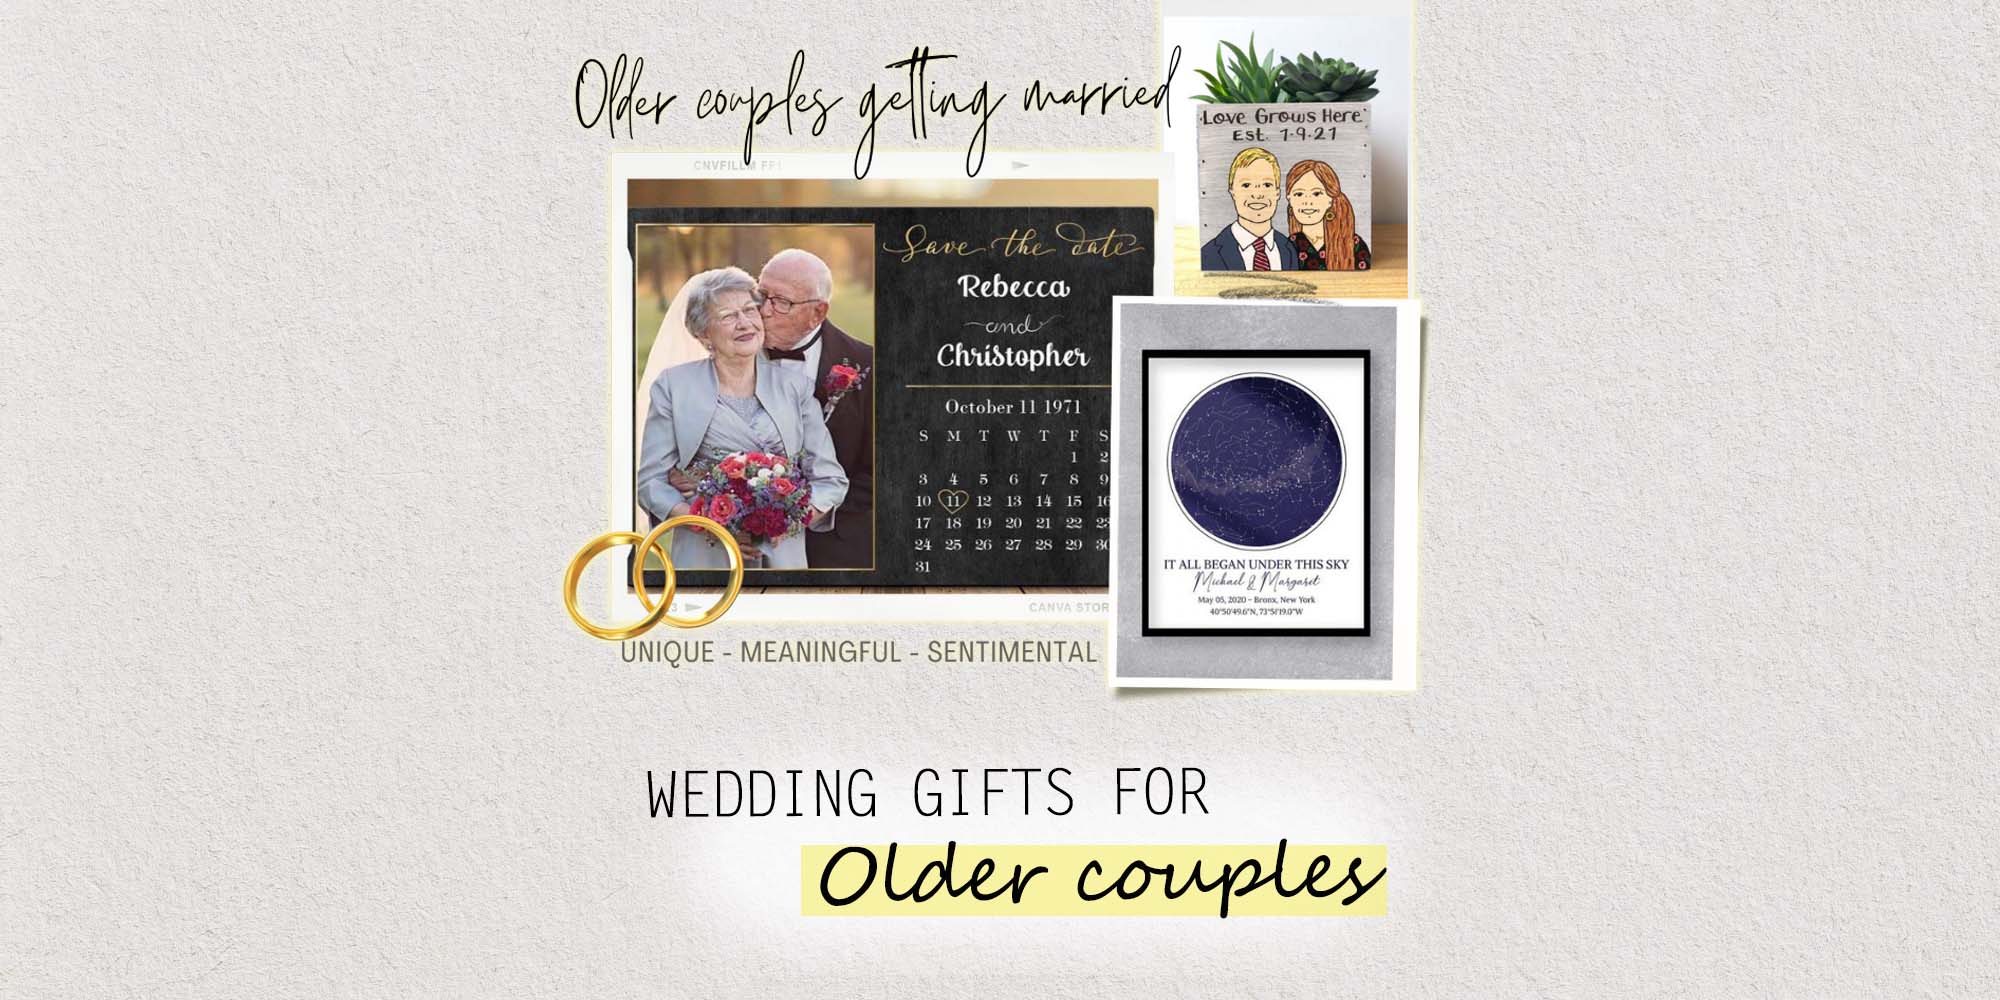 30 Good Wedding Gift Ideas for Older Couples in 2021